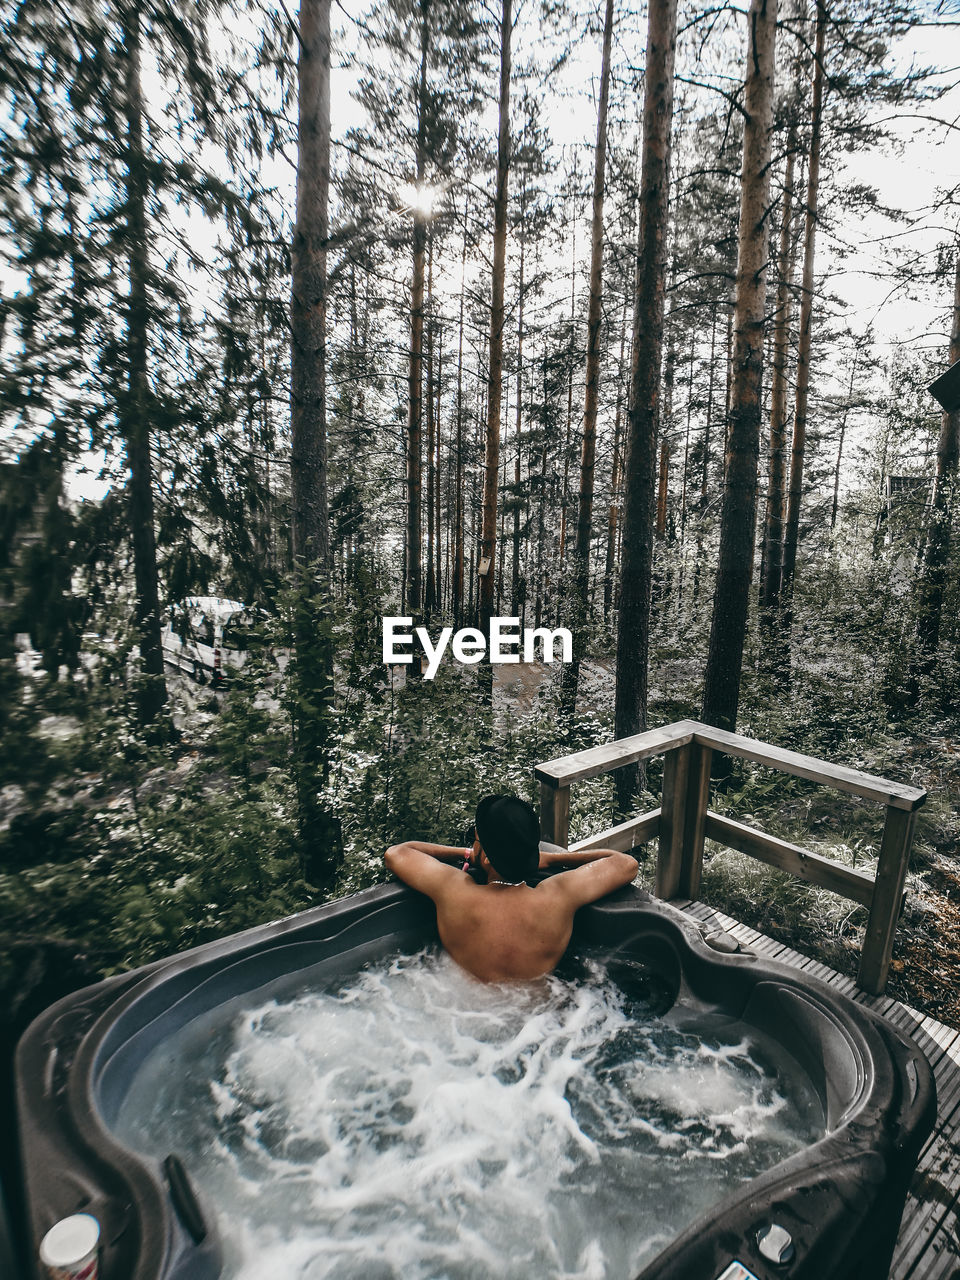 High angle view of shirtless man in hot tub against trees